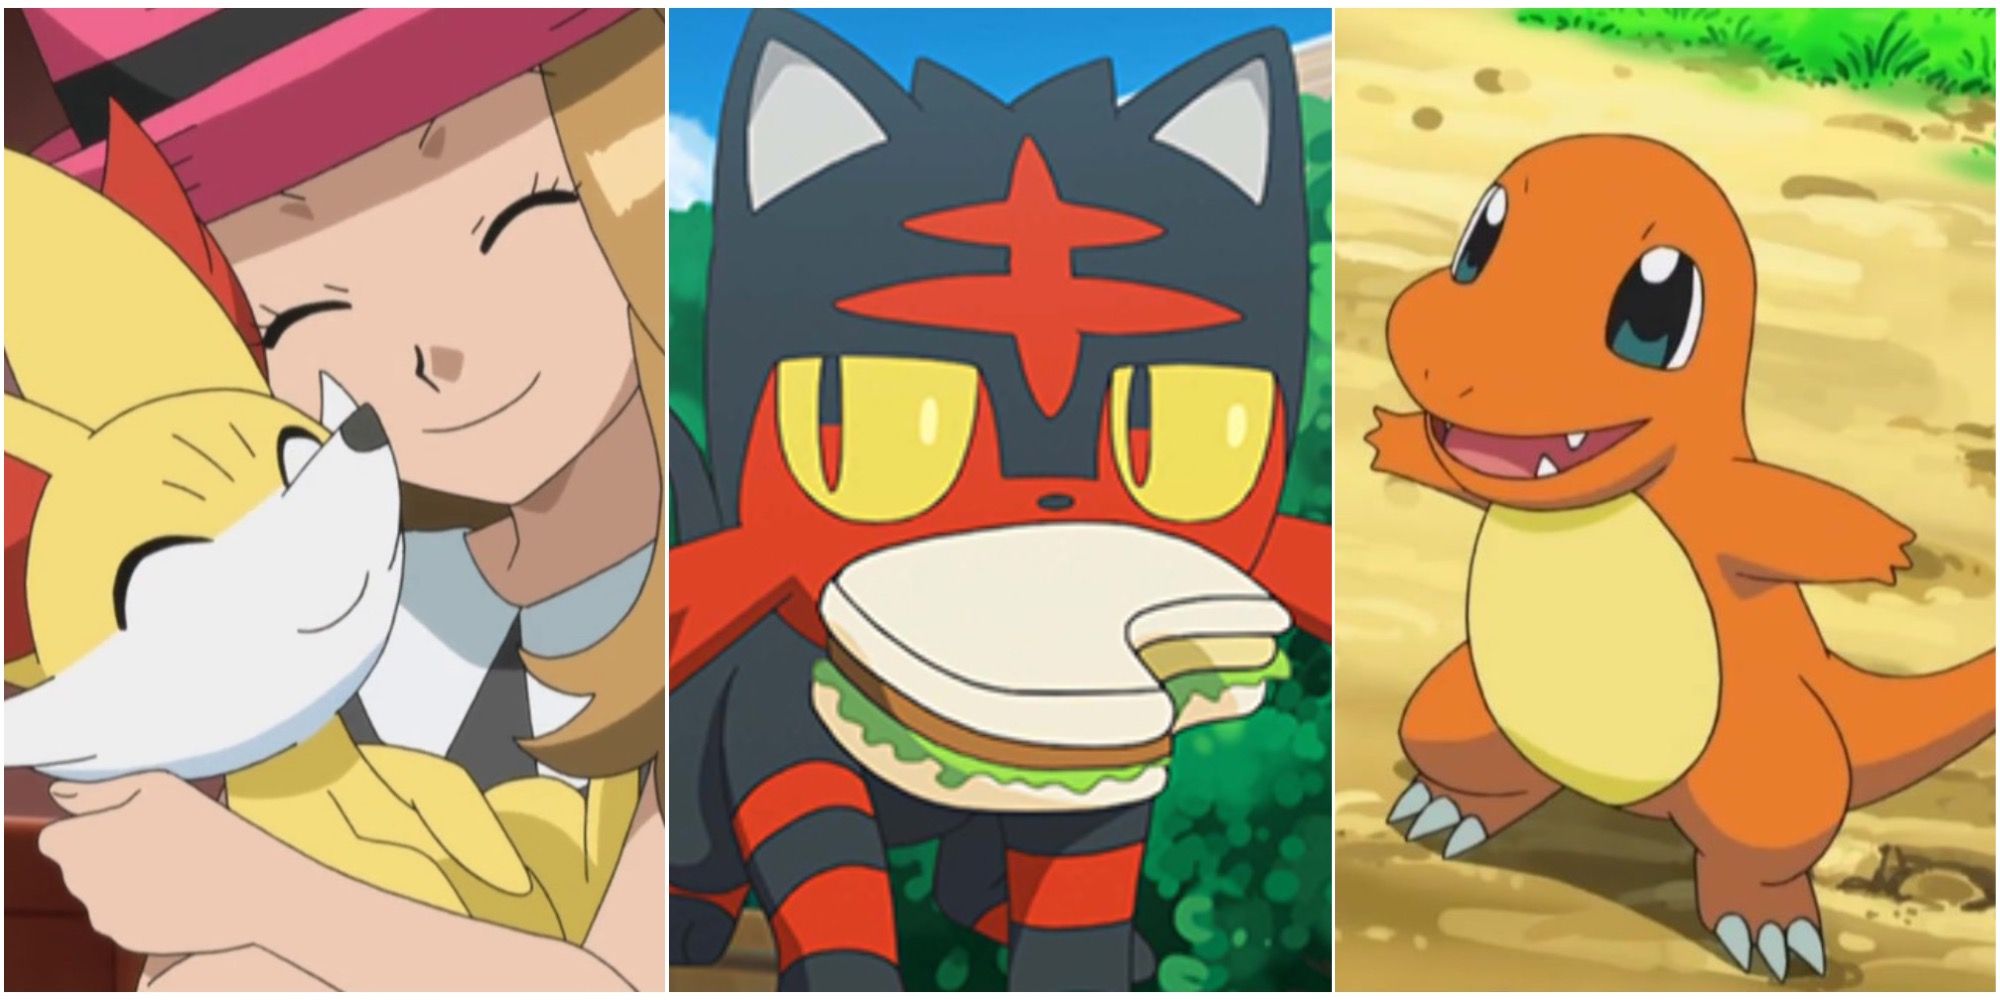 The Top 3 Fire Starter Pokemon of all time